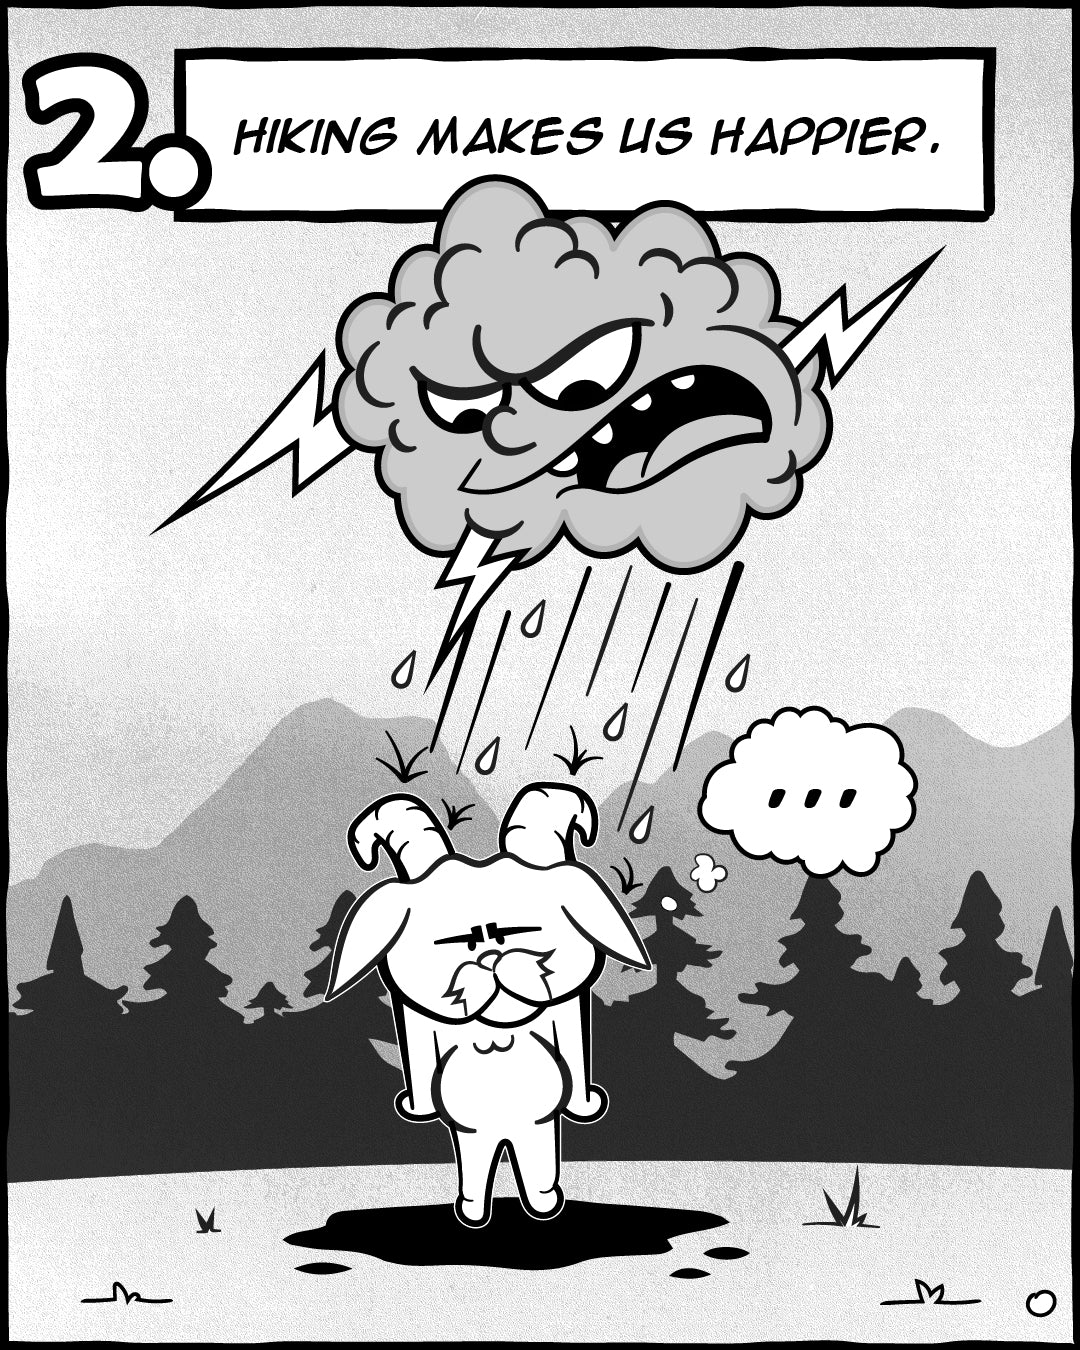 Hiking Makes Us Happier - 5 Reasons Hiking Is Good For Your Soul, The Adventures Of Lambert Comic Series | TRVRS Outdoors